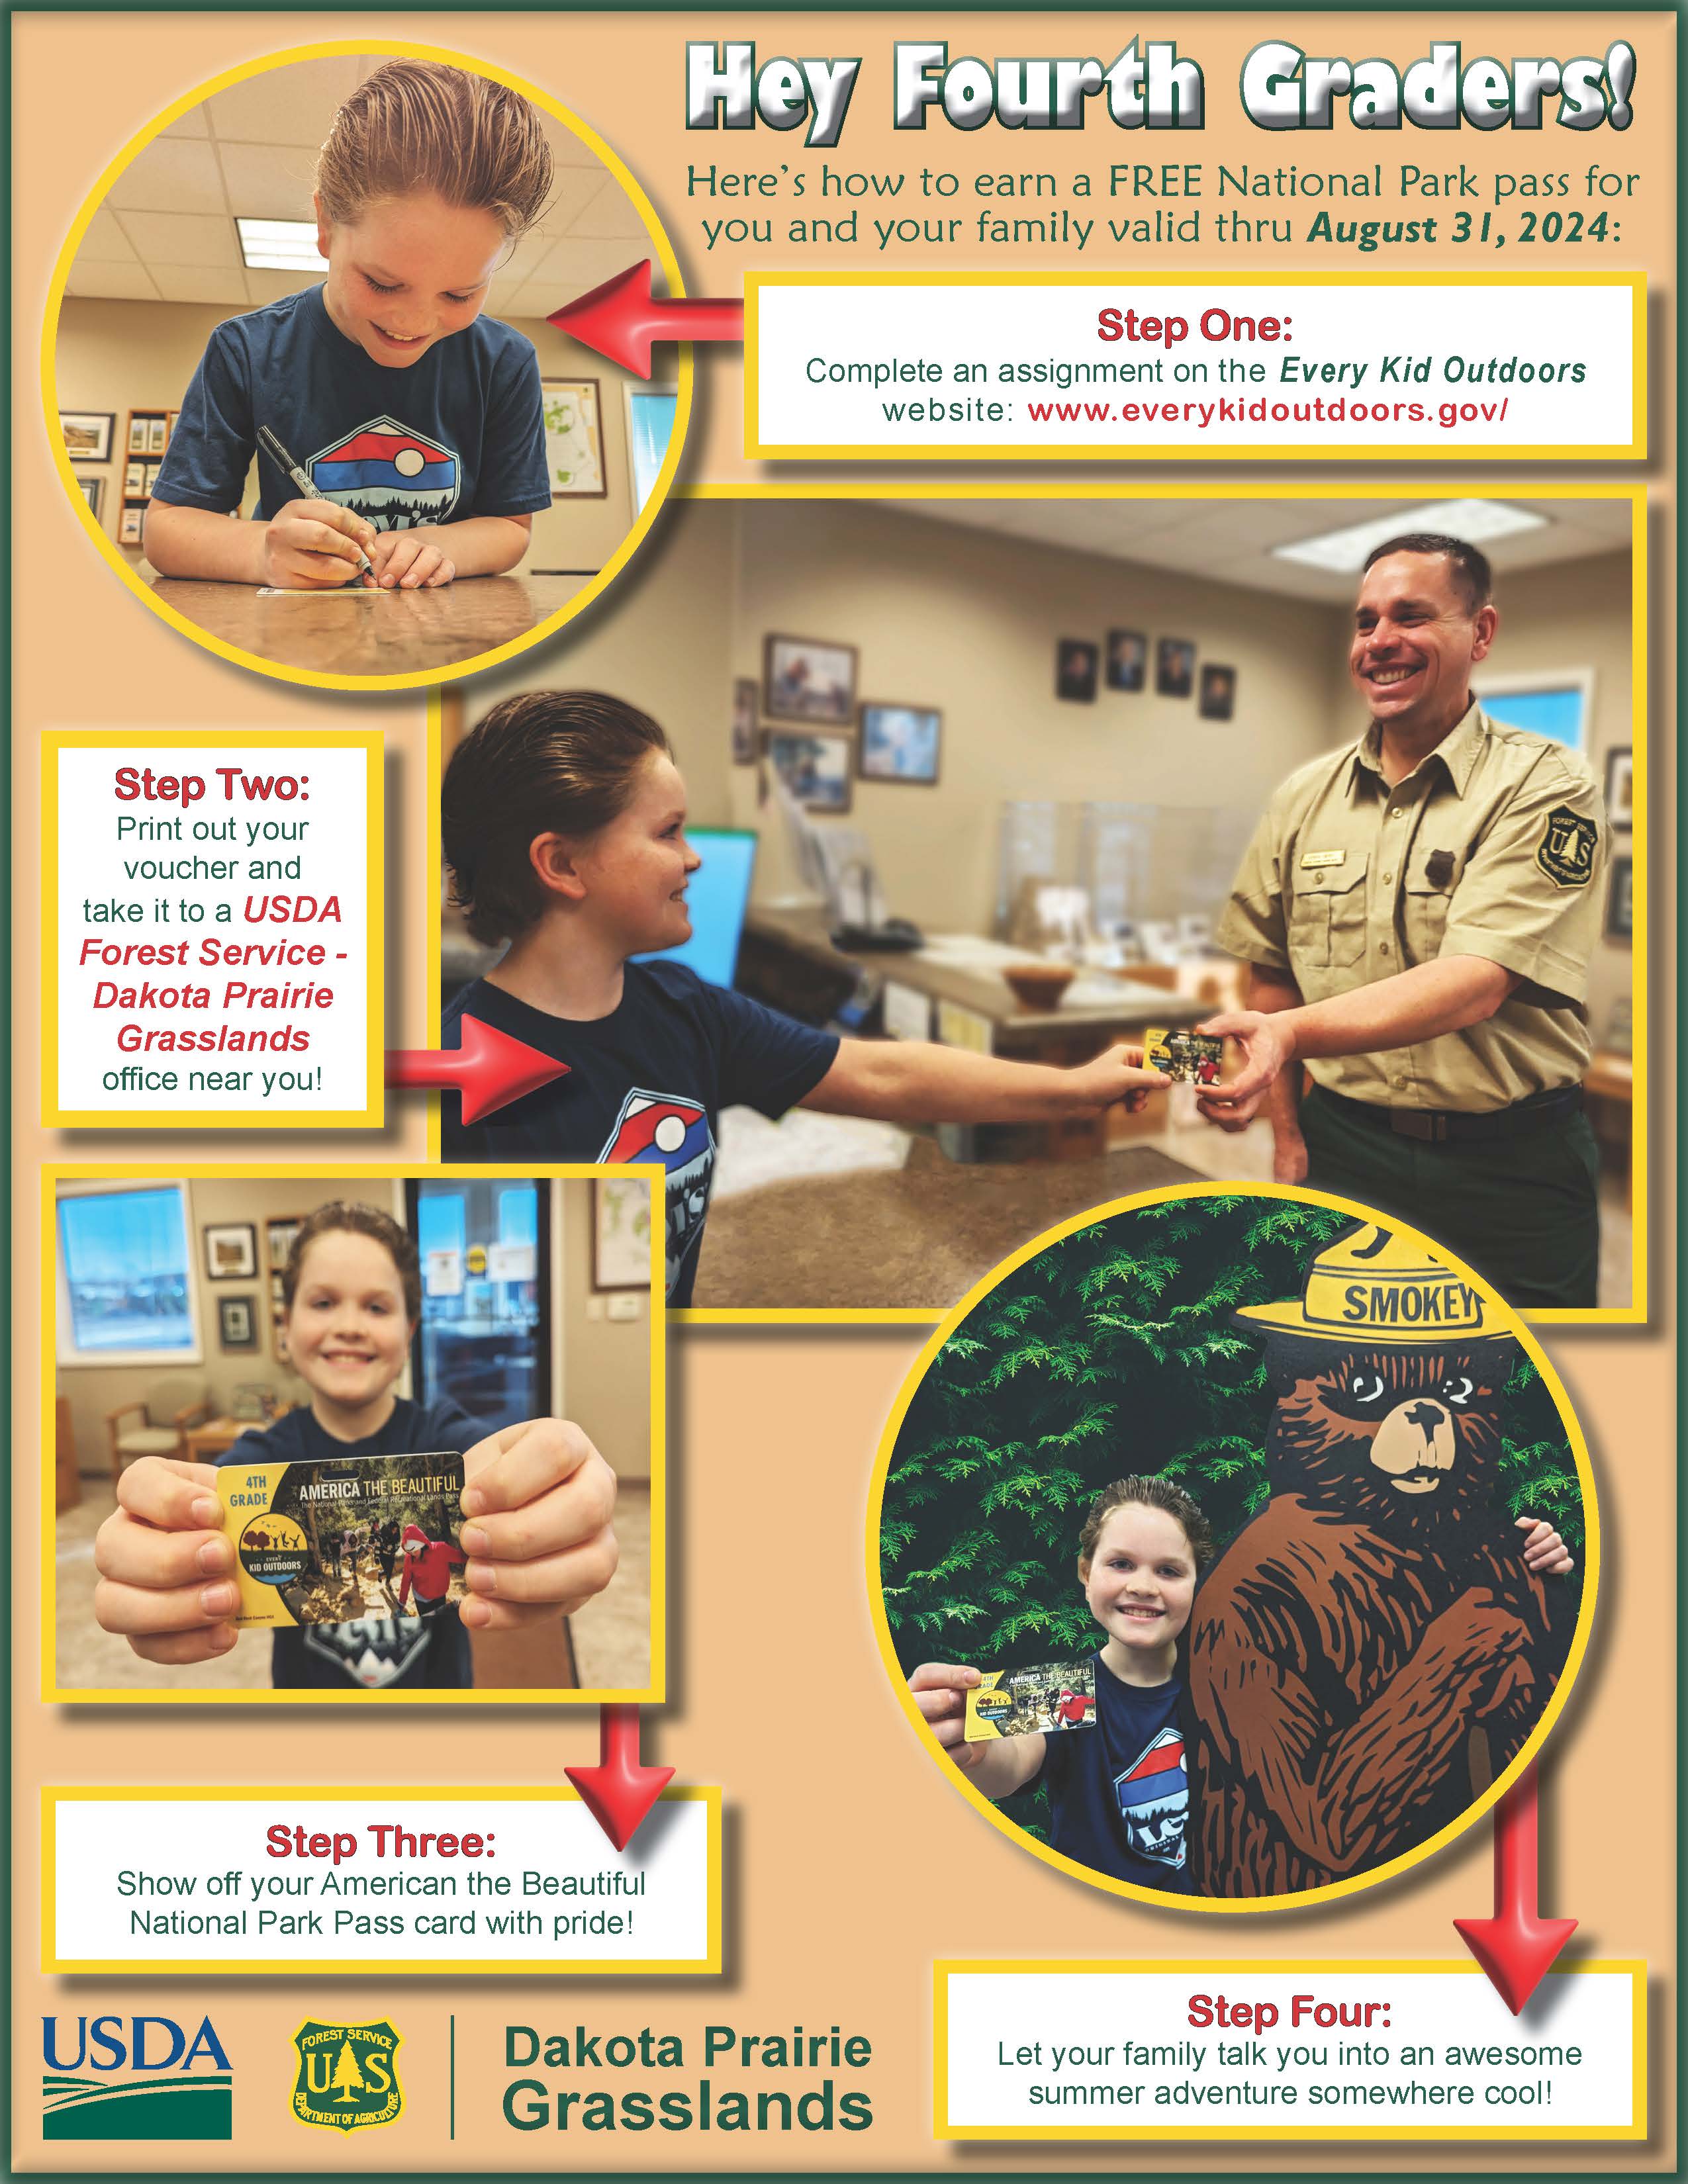 A flyer that states: Hey Fourth Graders! Here’s how to earn a FREE National Park pass for you and your family valid thru August 31, 2024: Step One:
Complete an assignment on the Every Kid Outdoors website: www.everykidoutdoors.gov/ Step Two:
Print out your voucher and take it to a USDA Forest Service - Dakota Prairie Grasslands office near you! Step Three: Show off your American the Beautiful National Park Pass card with pride! Step Four: Let your family talk you into an awesome summer adventure somewhere cool! Dakota Prairie Grasslands. USDA and Forest Service Logos.
